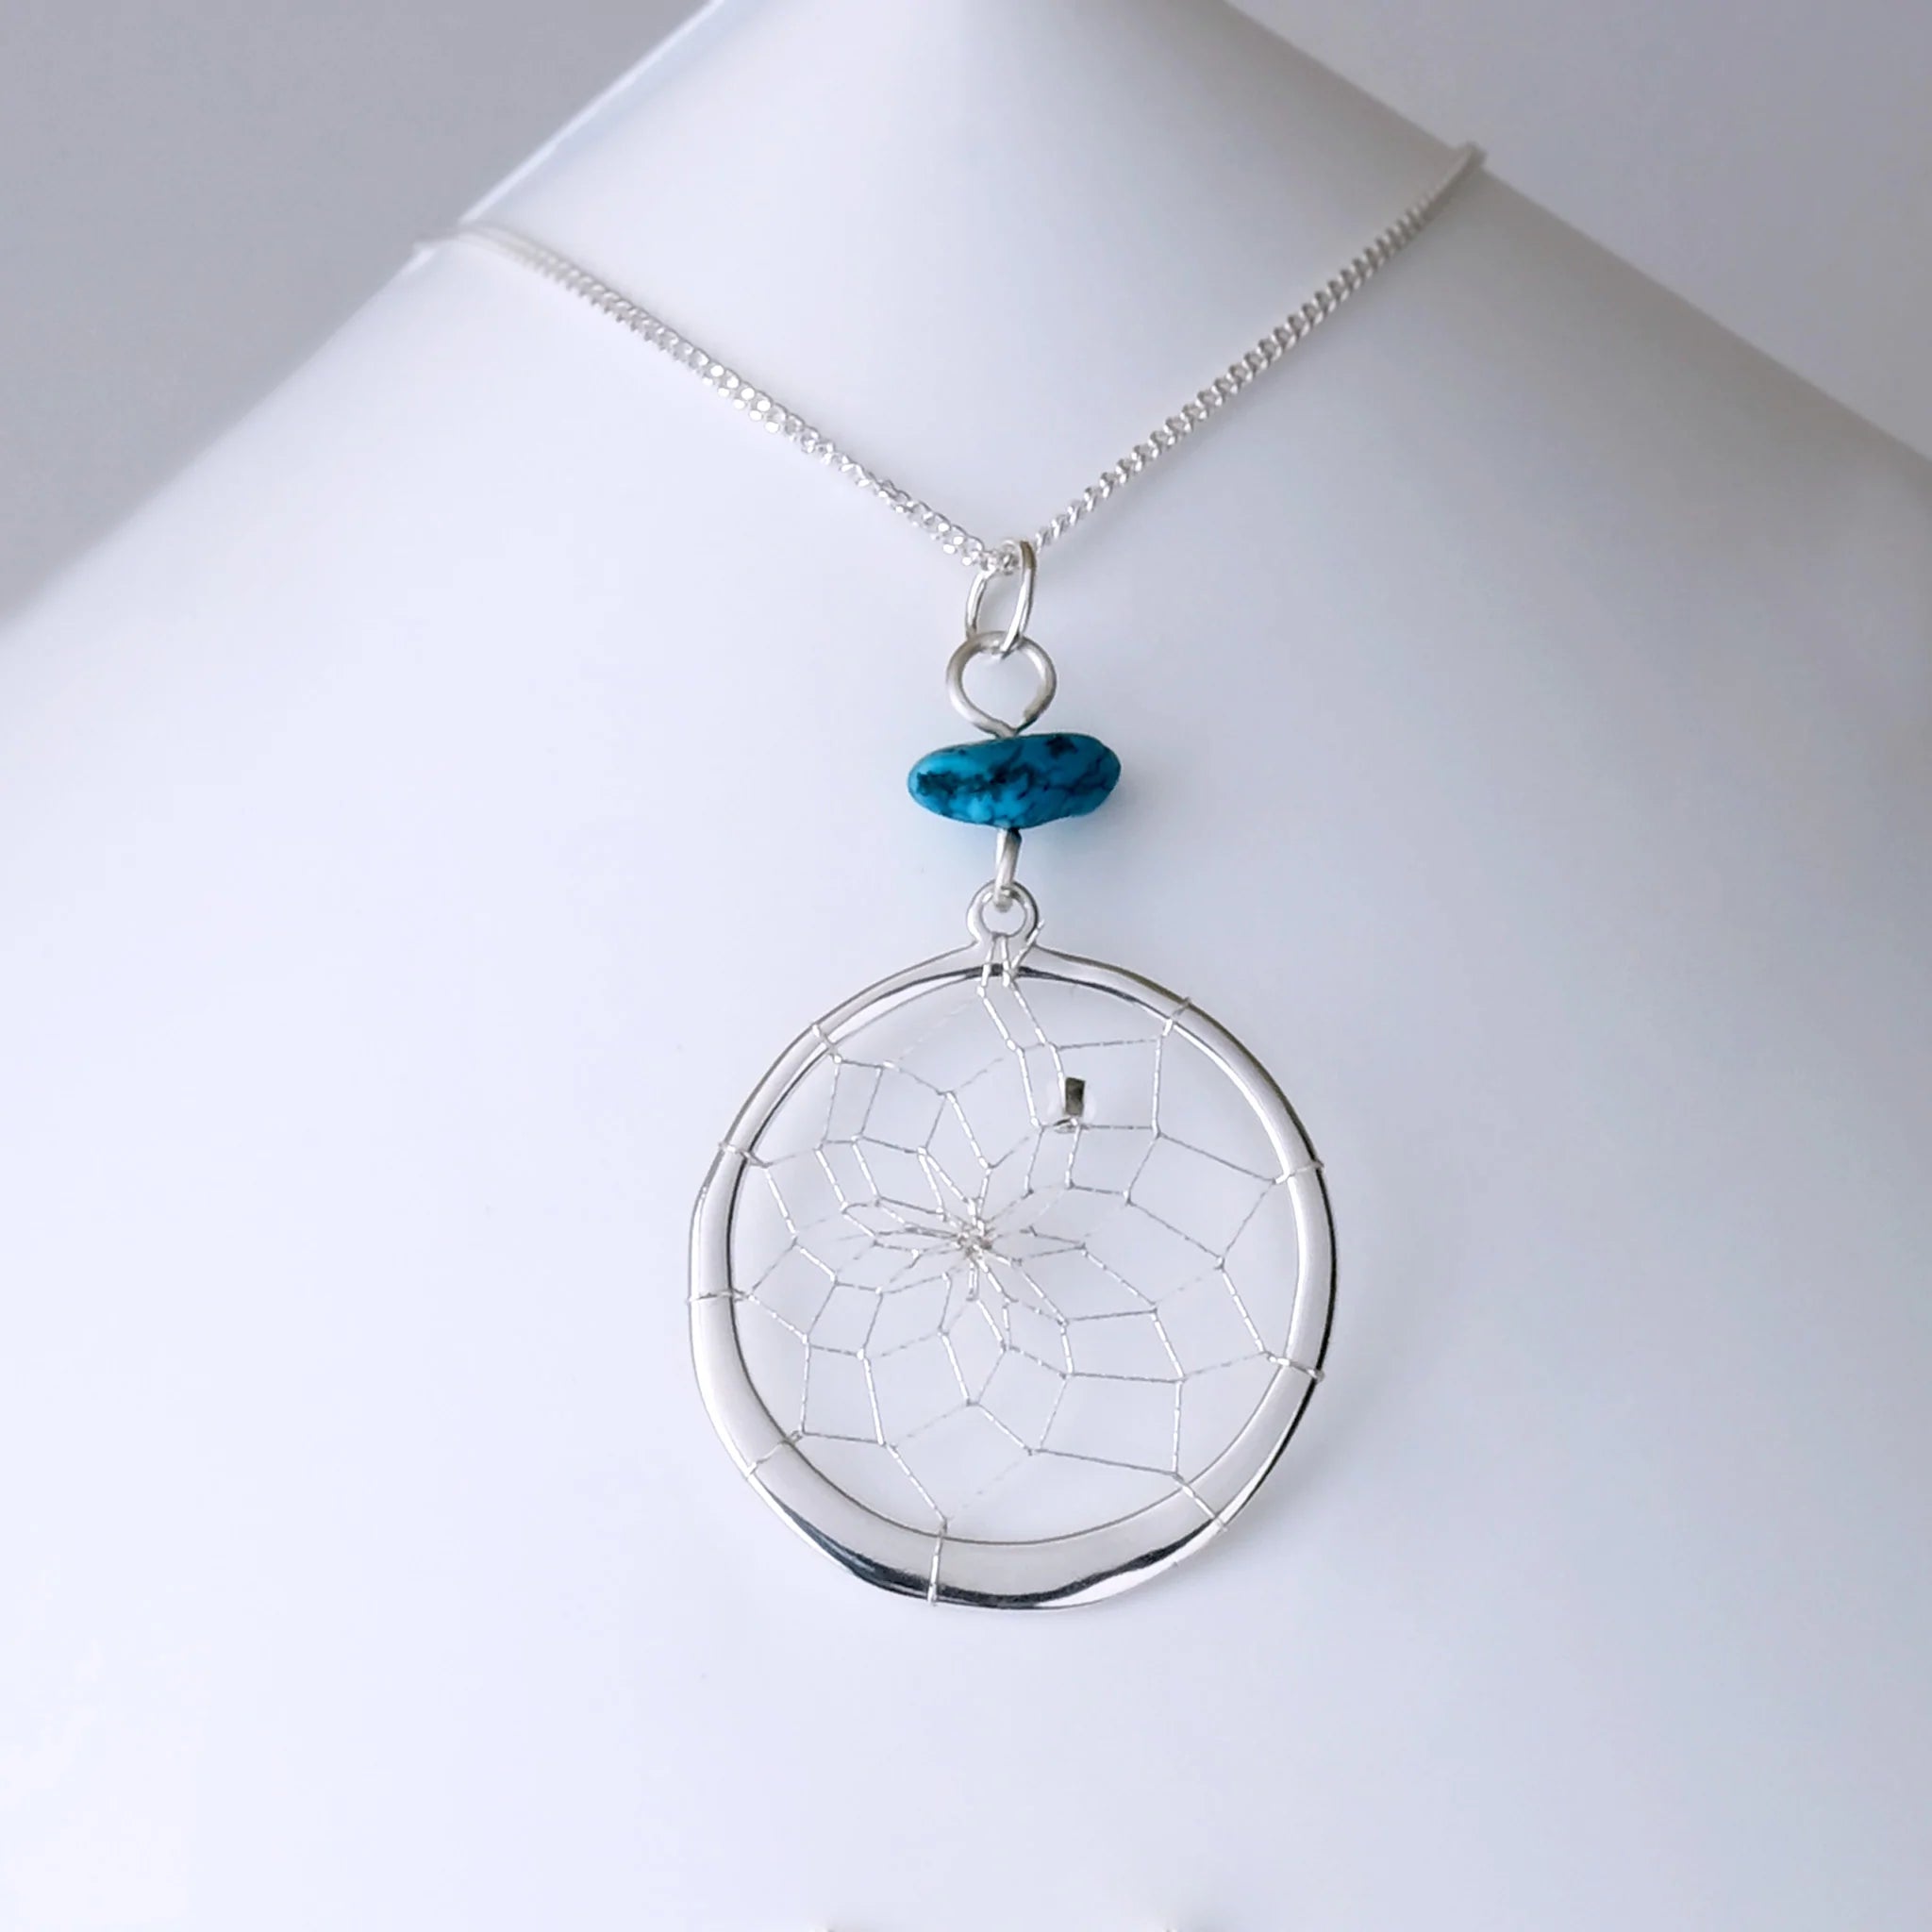 Silver Dreamcatcher Pendant with Turquoise Stone